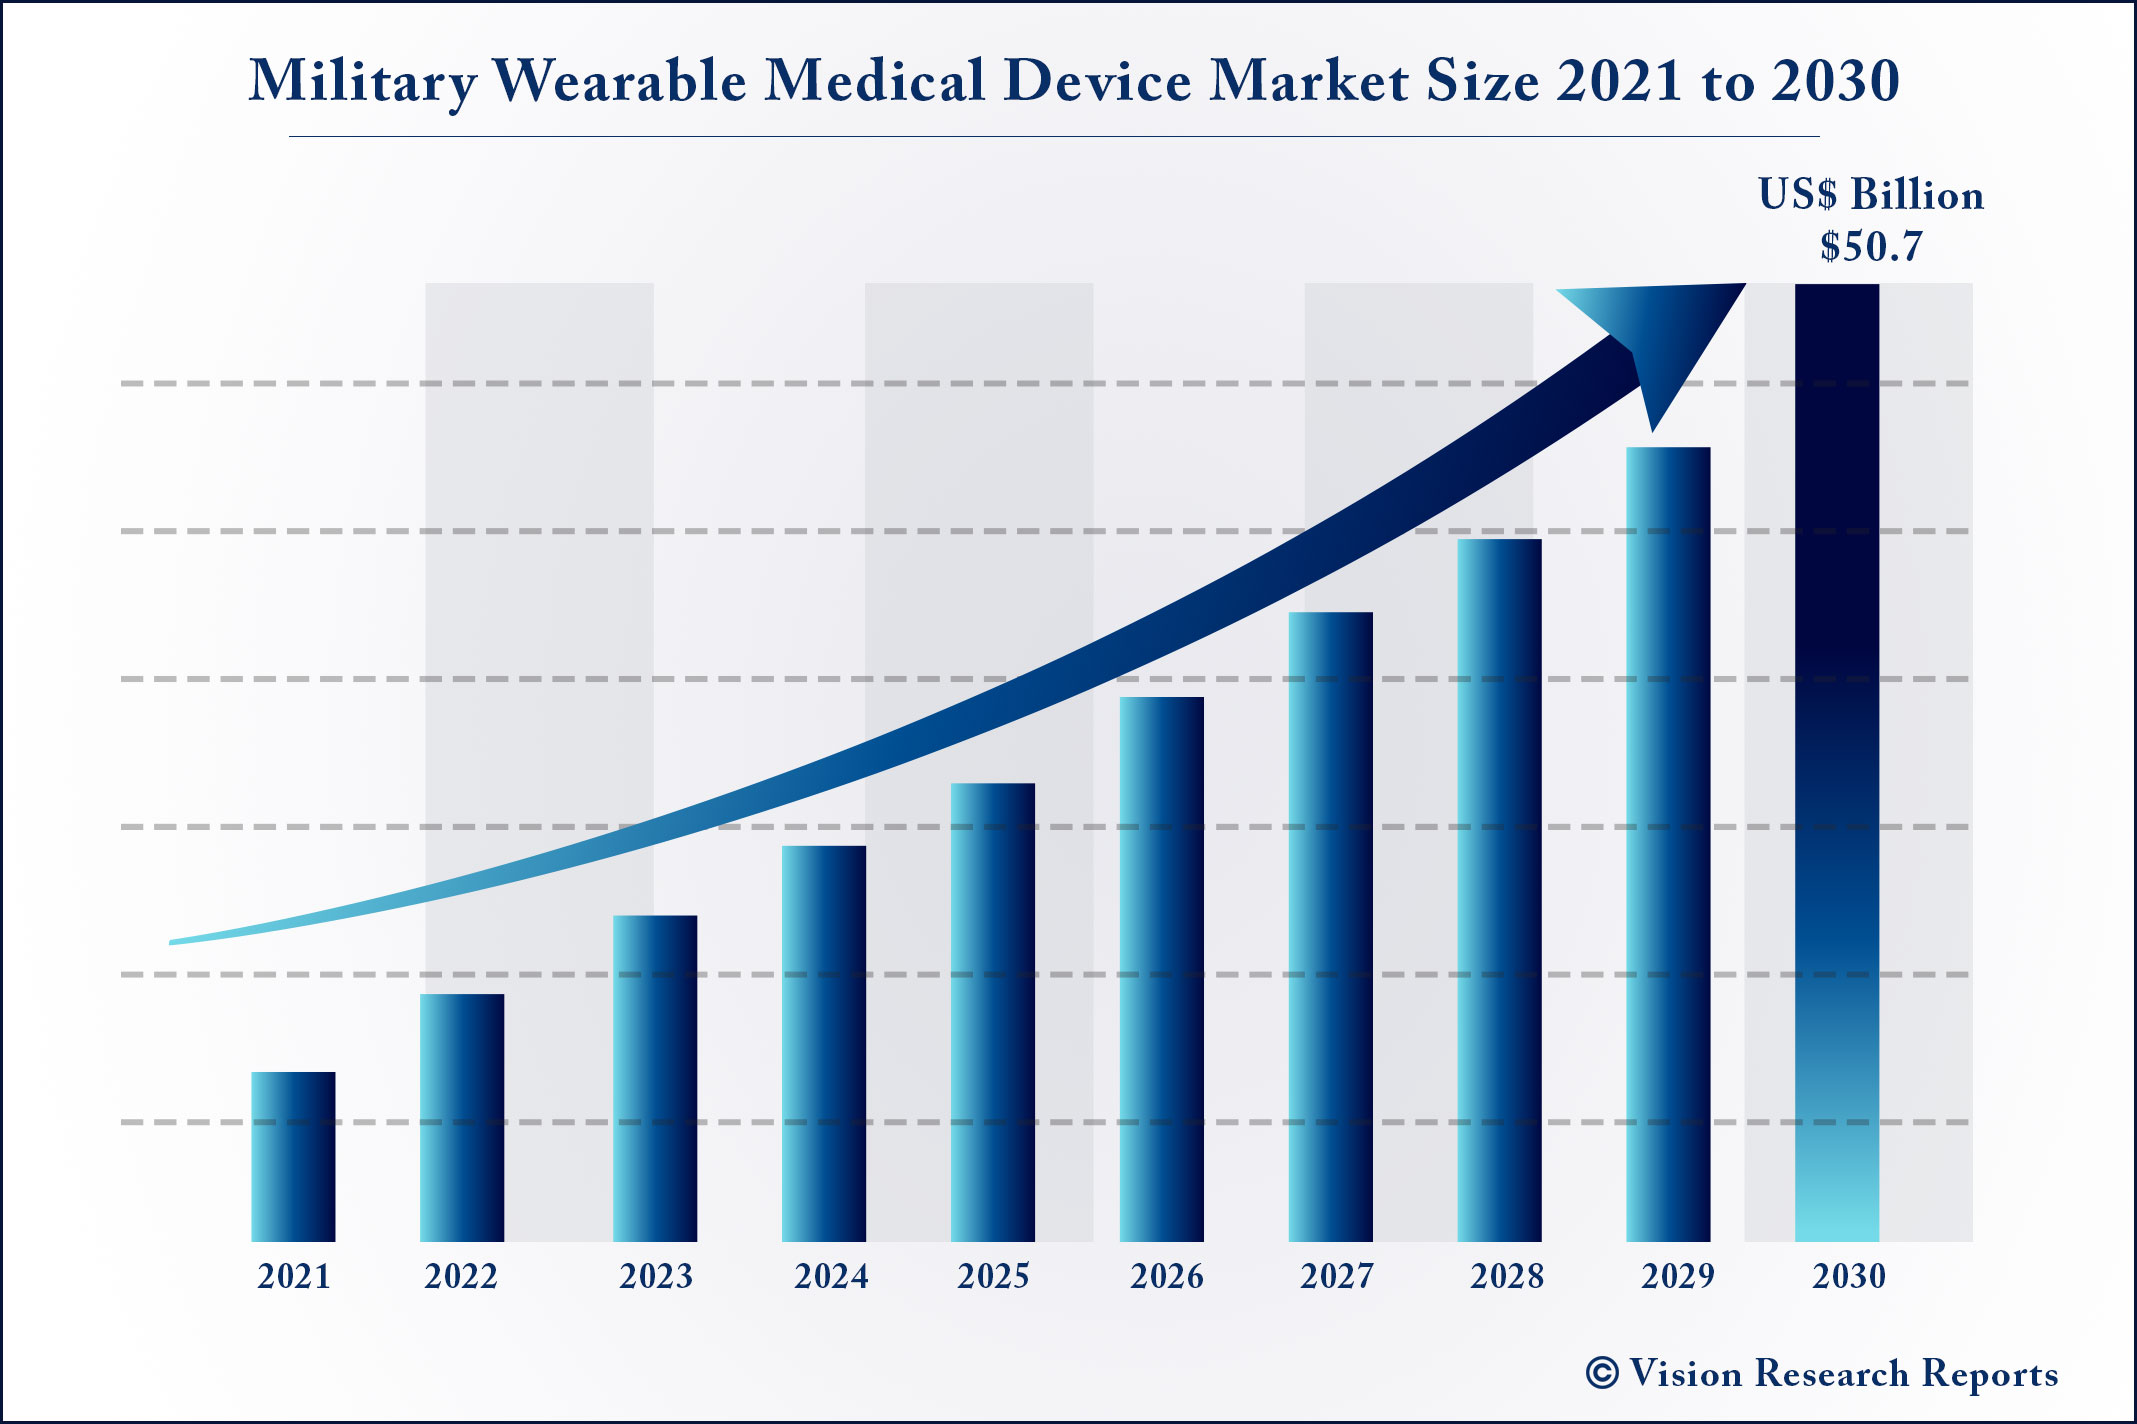 Military Wearable Medical Device Market Size 2021 to 2030